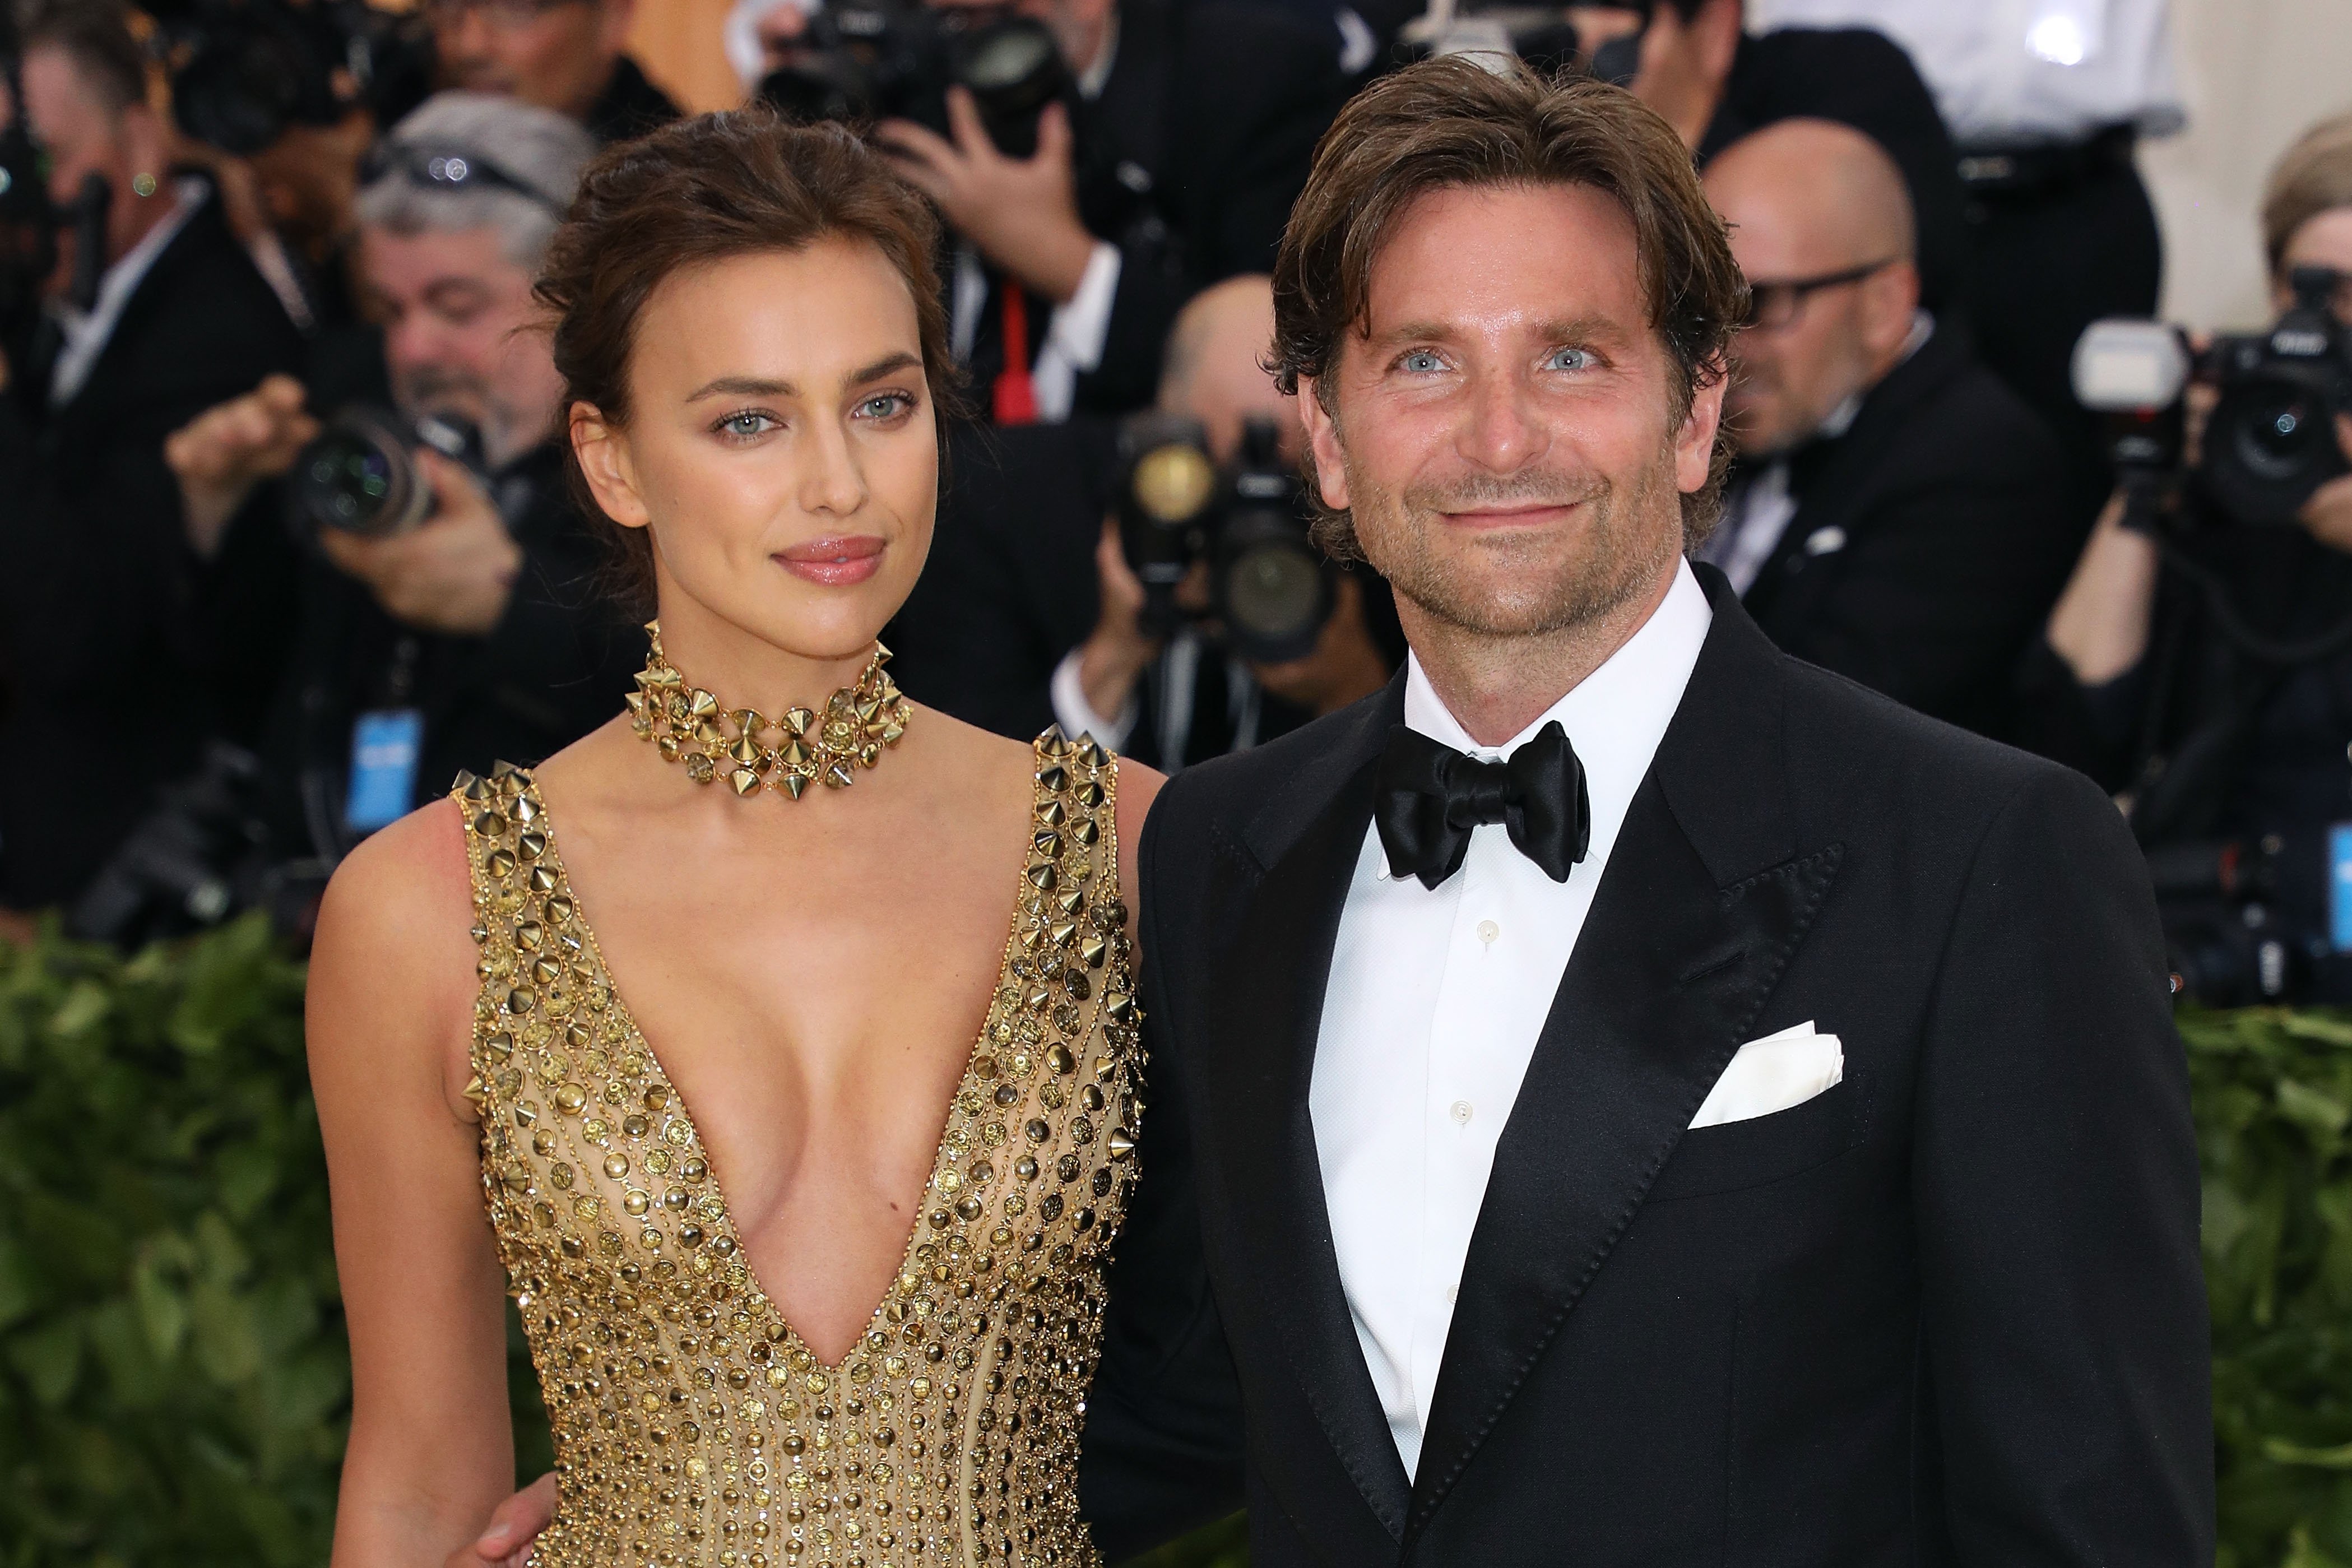 Bradley Cooper and Irina Shayk attend the Heavenly Bodies: Fashion & The Catholic Imagination" Benefit event in May 2018 | Photo: Getty Images